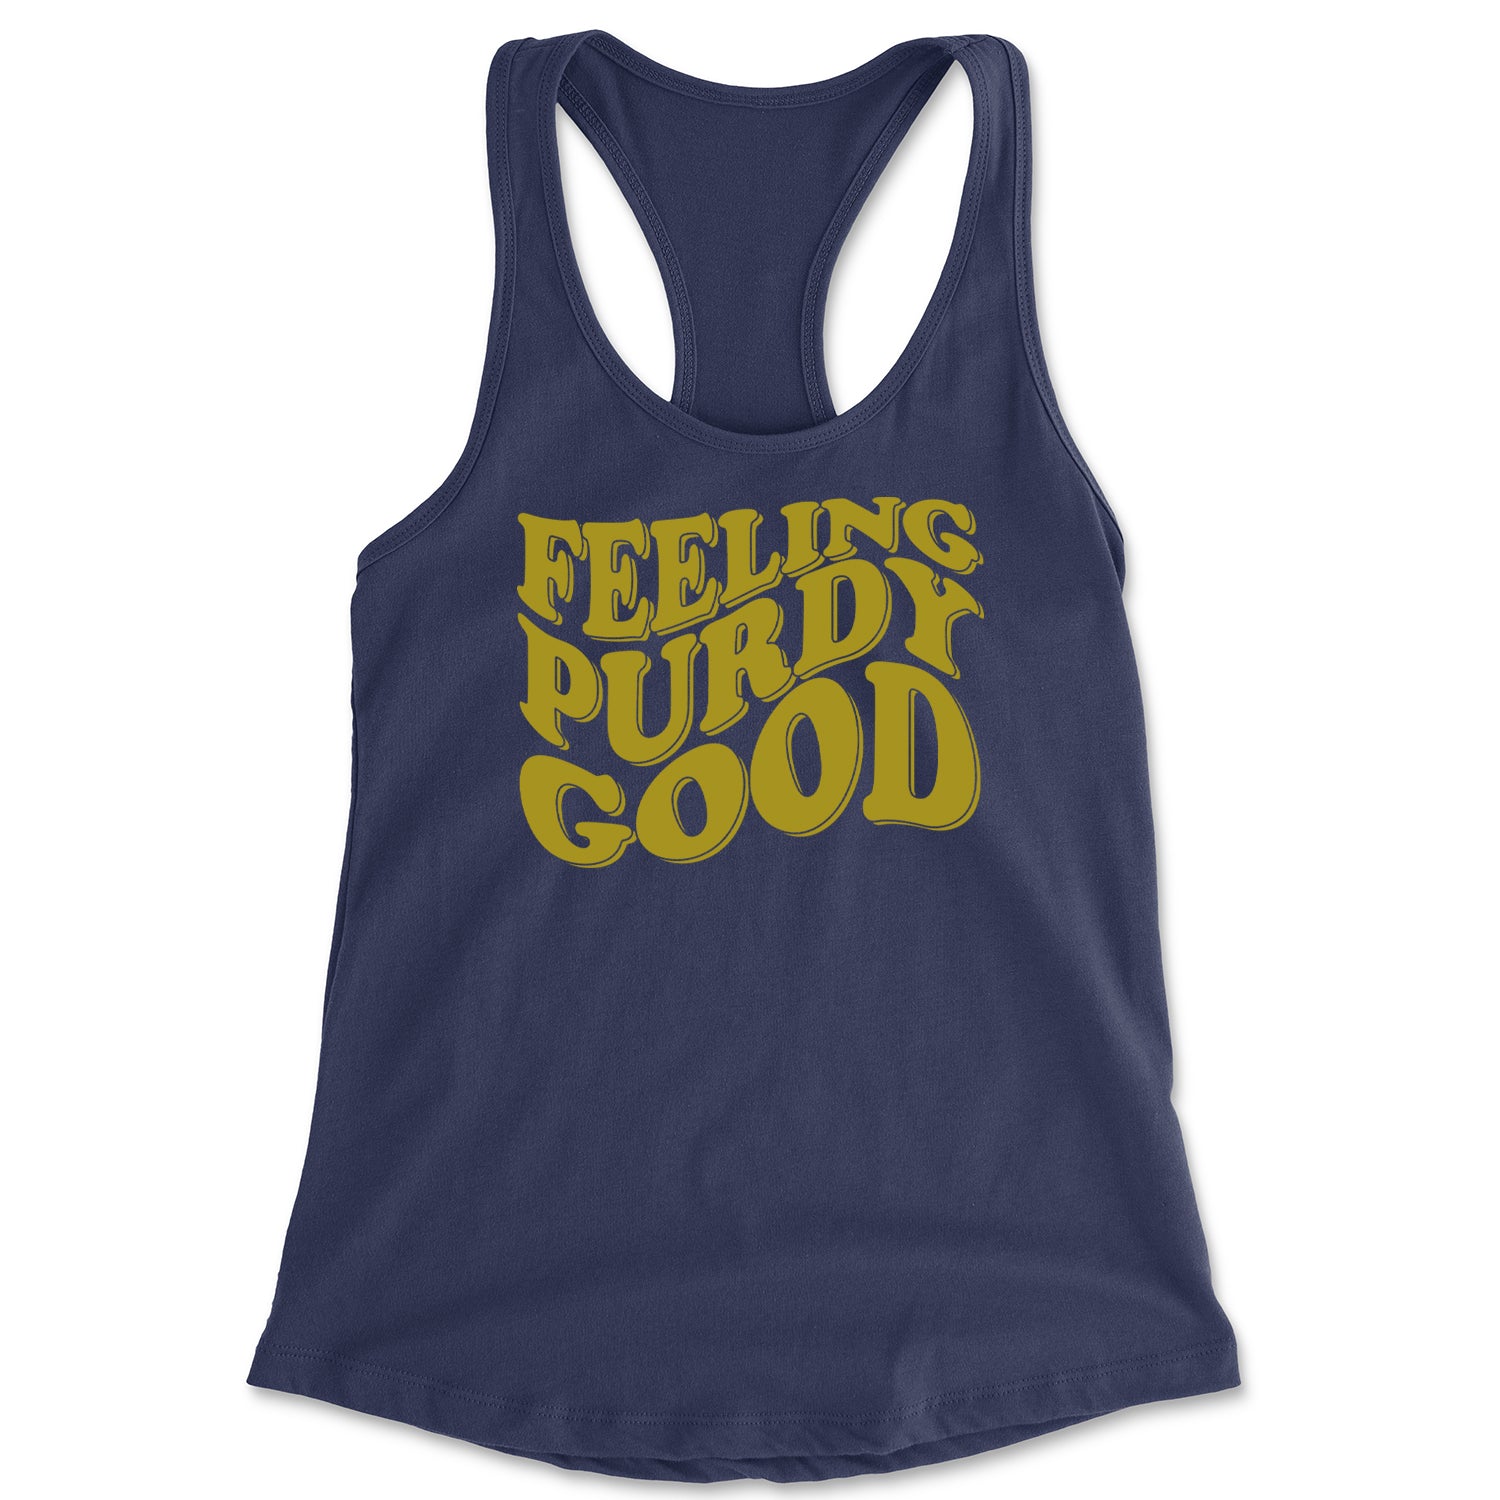 Feeling Purdy Good Racerback Tank Top for Women 13, football by Expression Tees